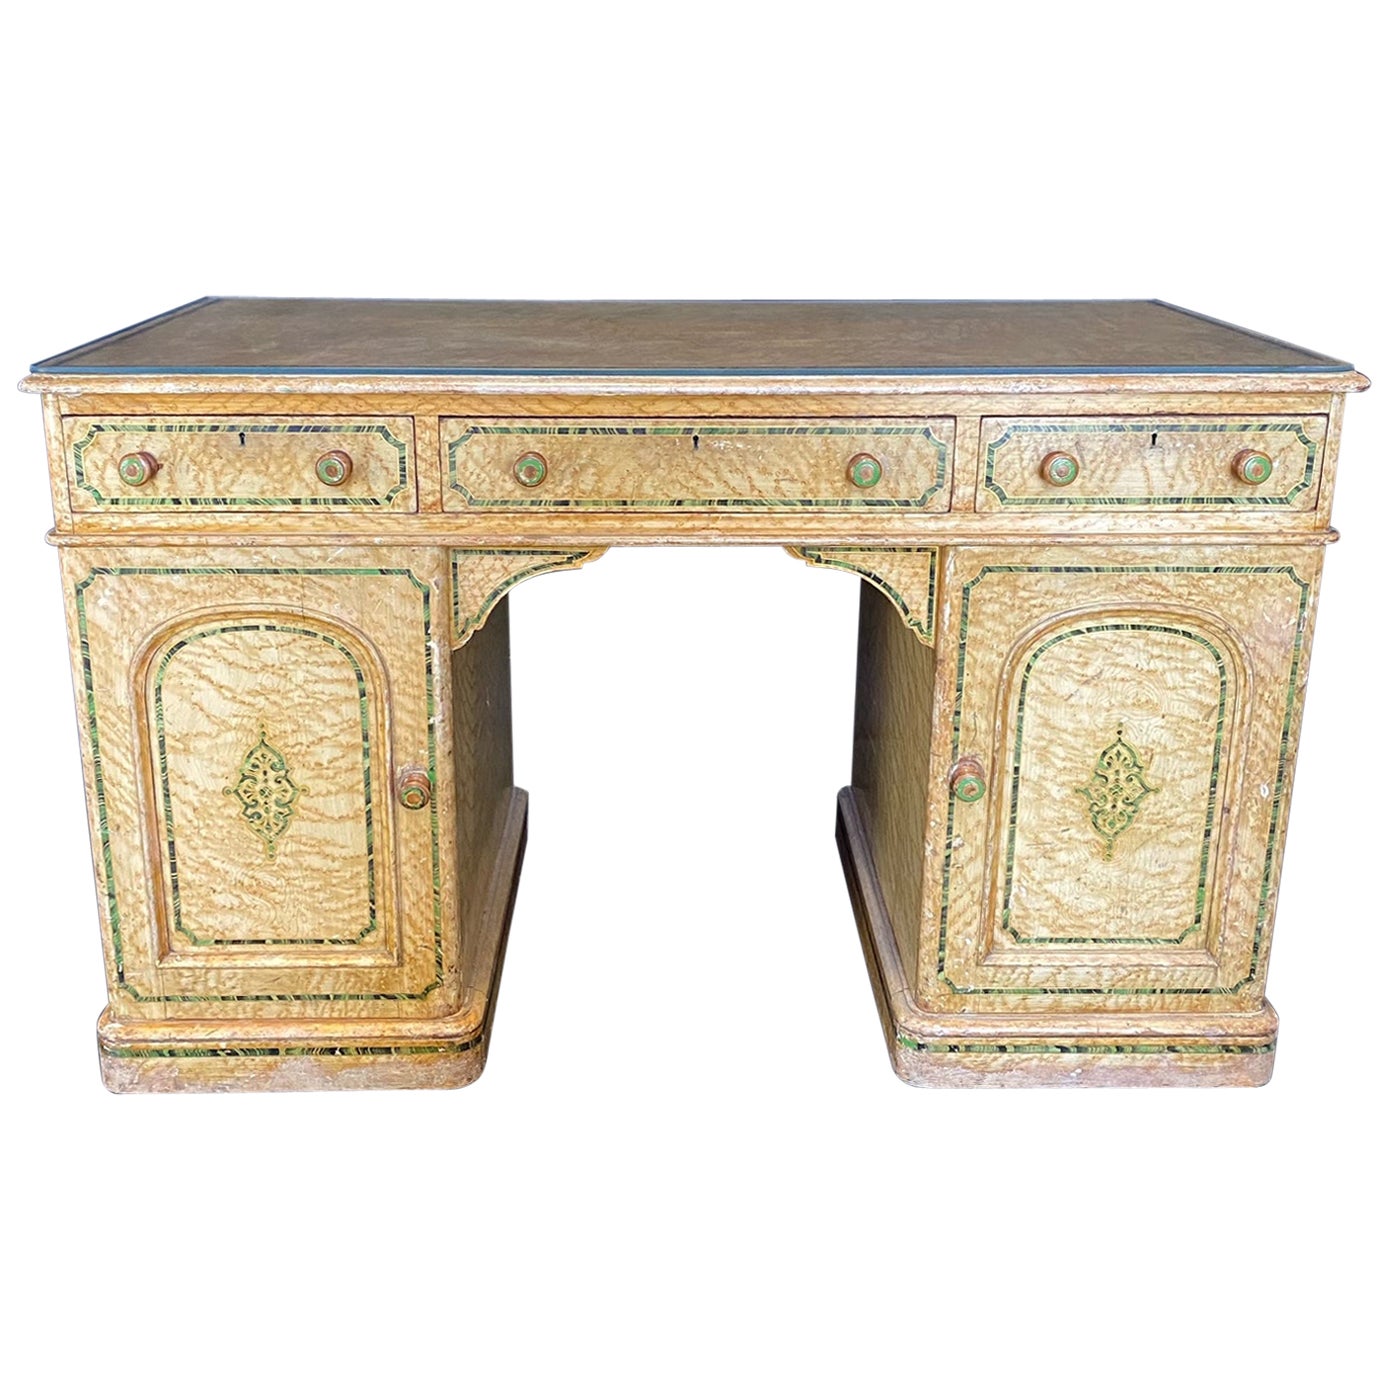 Magnificent English 19th Century Faux Painted Marbleized Pedestal Writing Desk